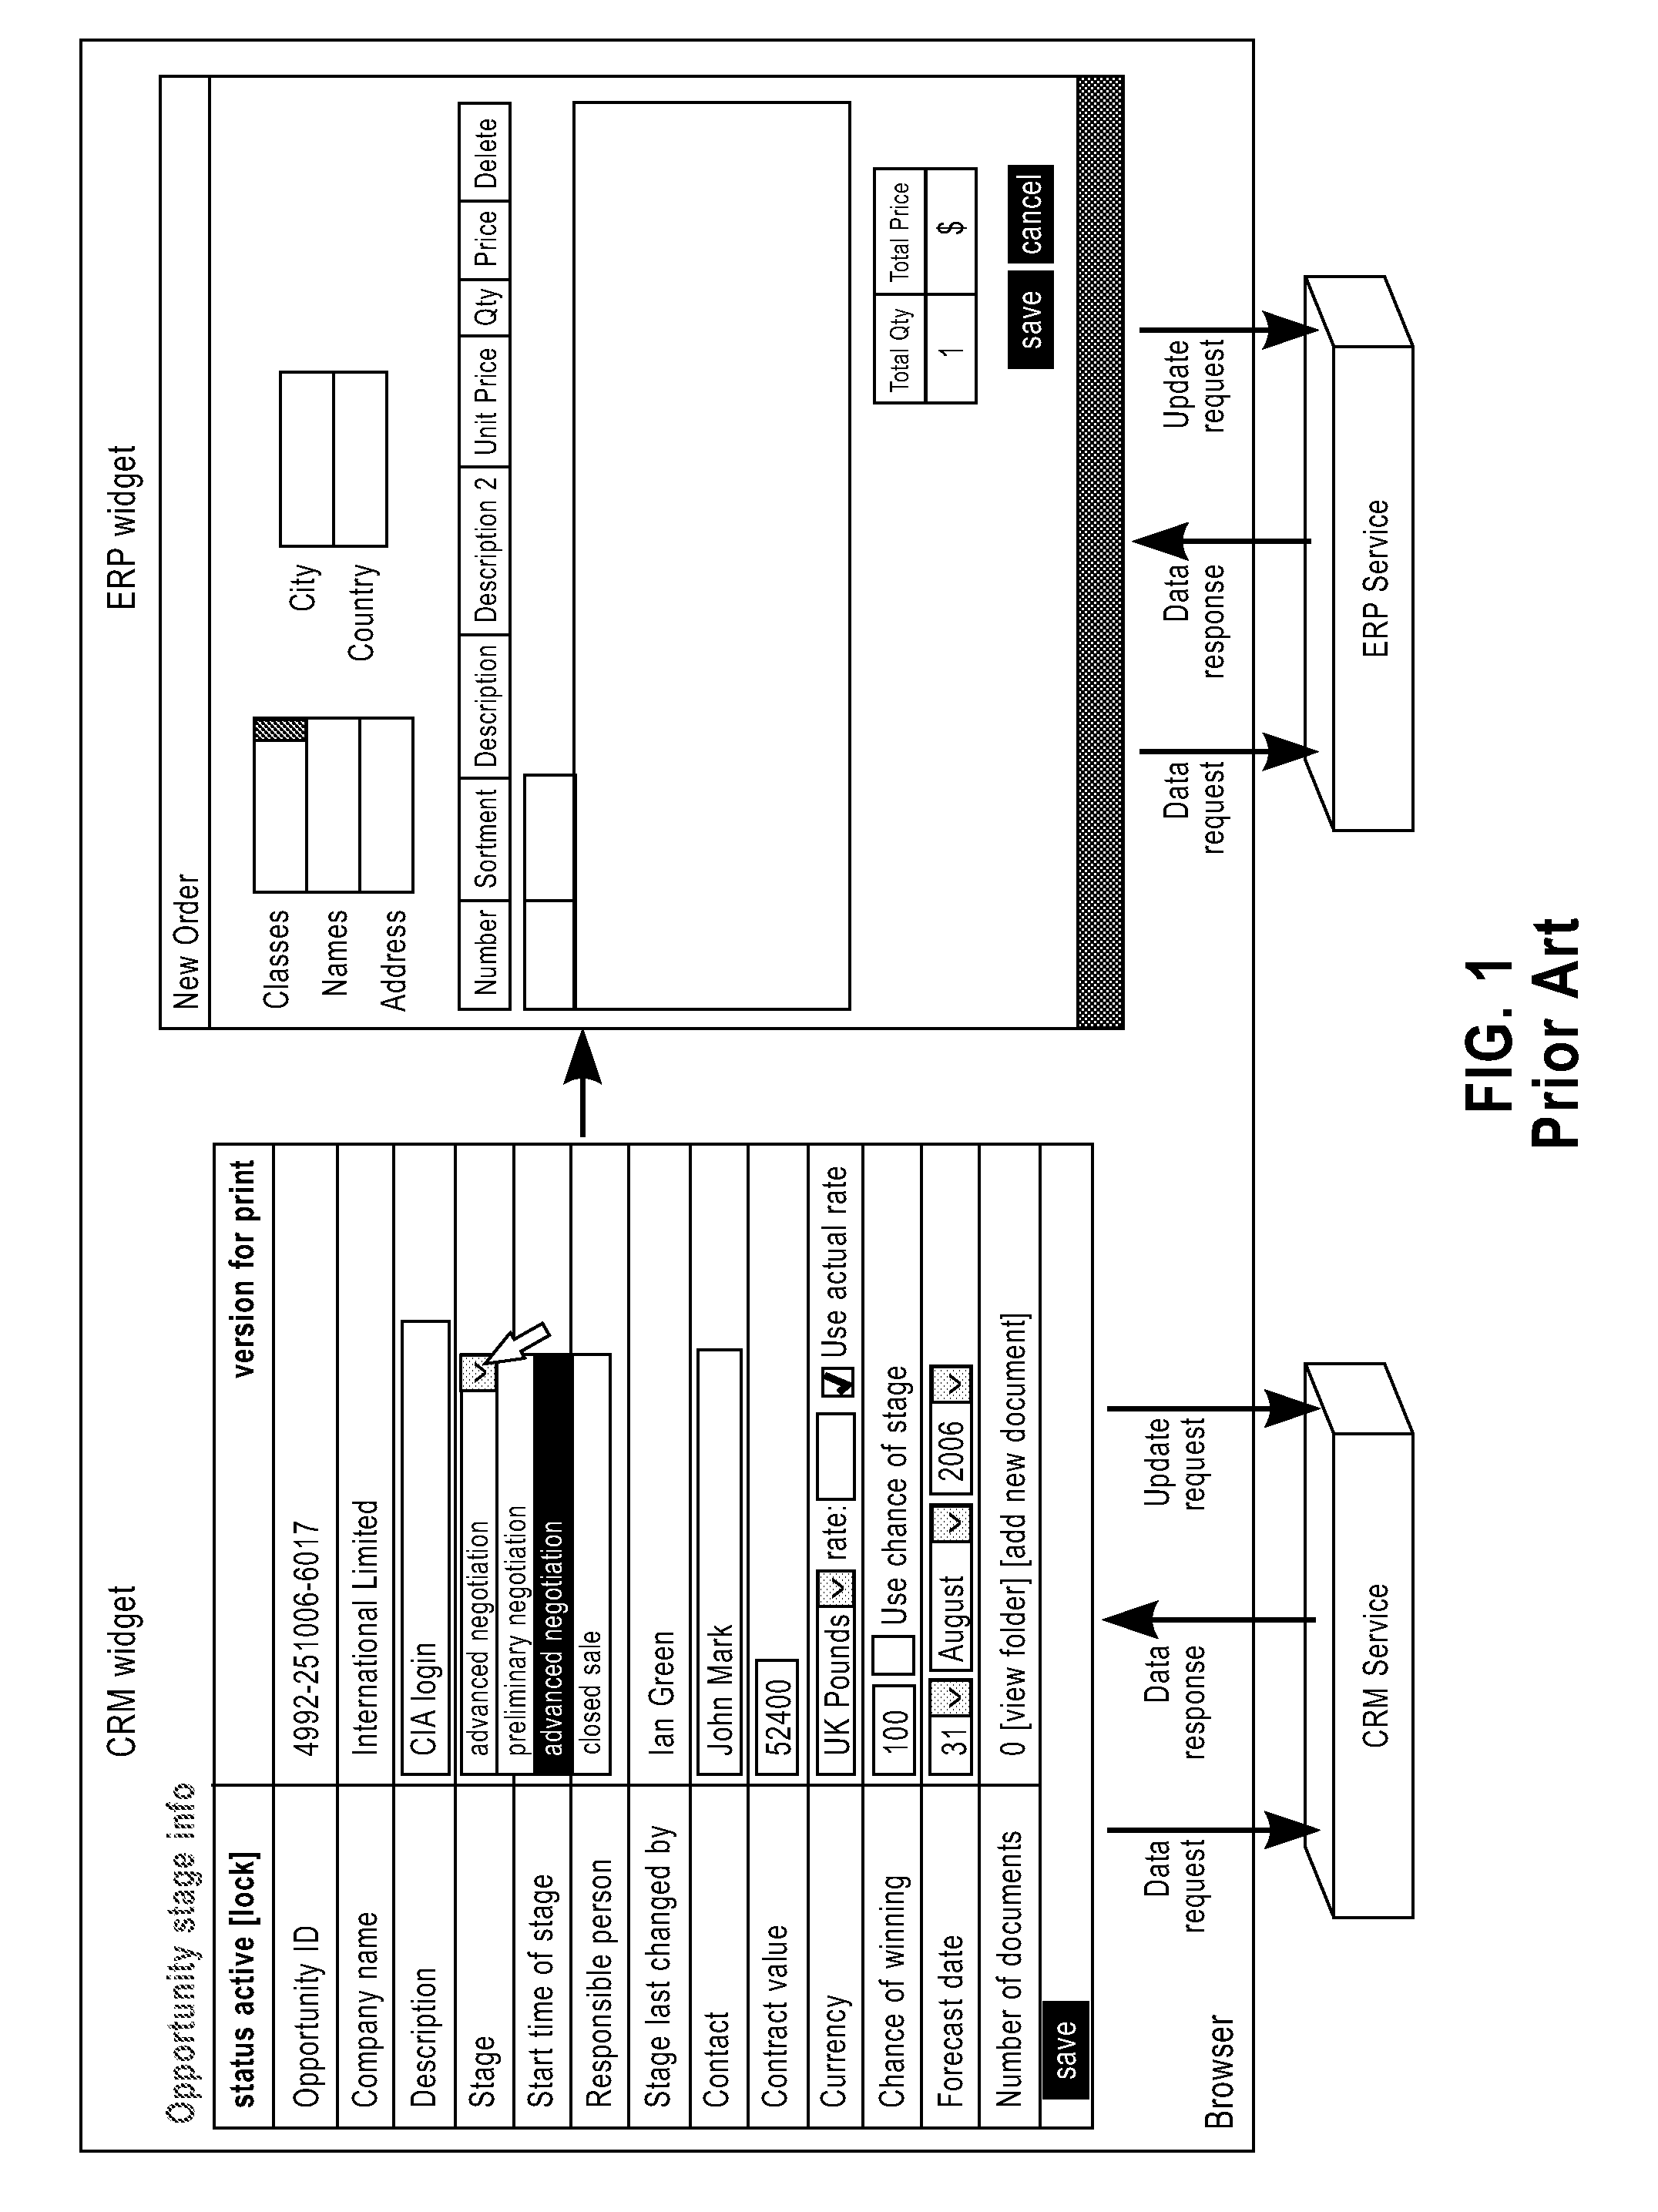 Method and apparatus for reliable mashup